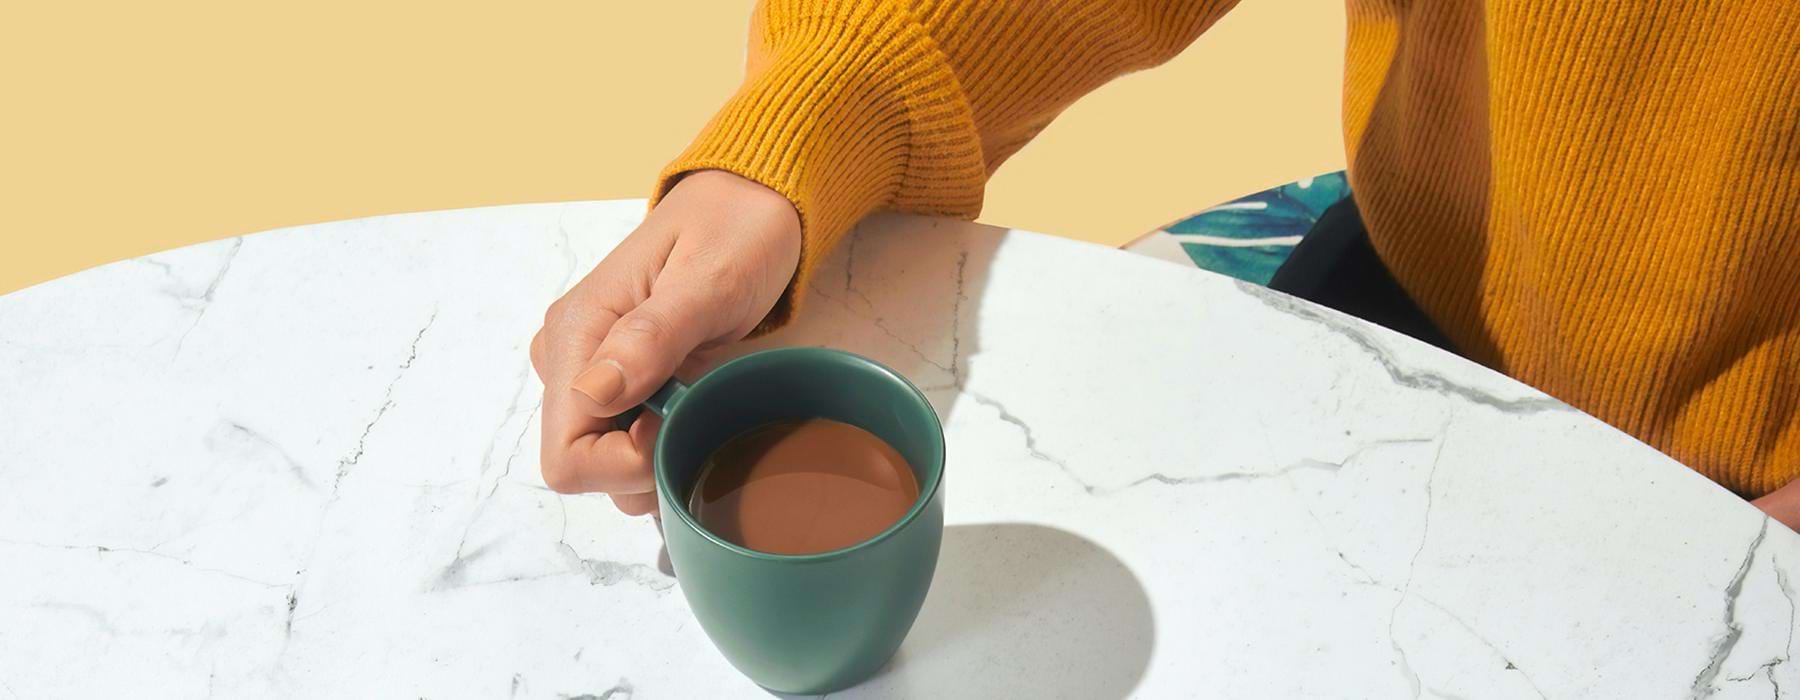 a person holding a cup of coffee